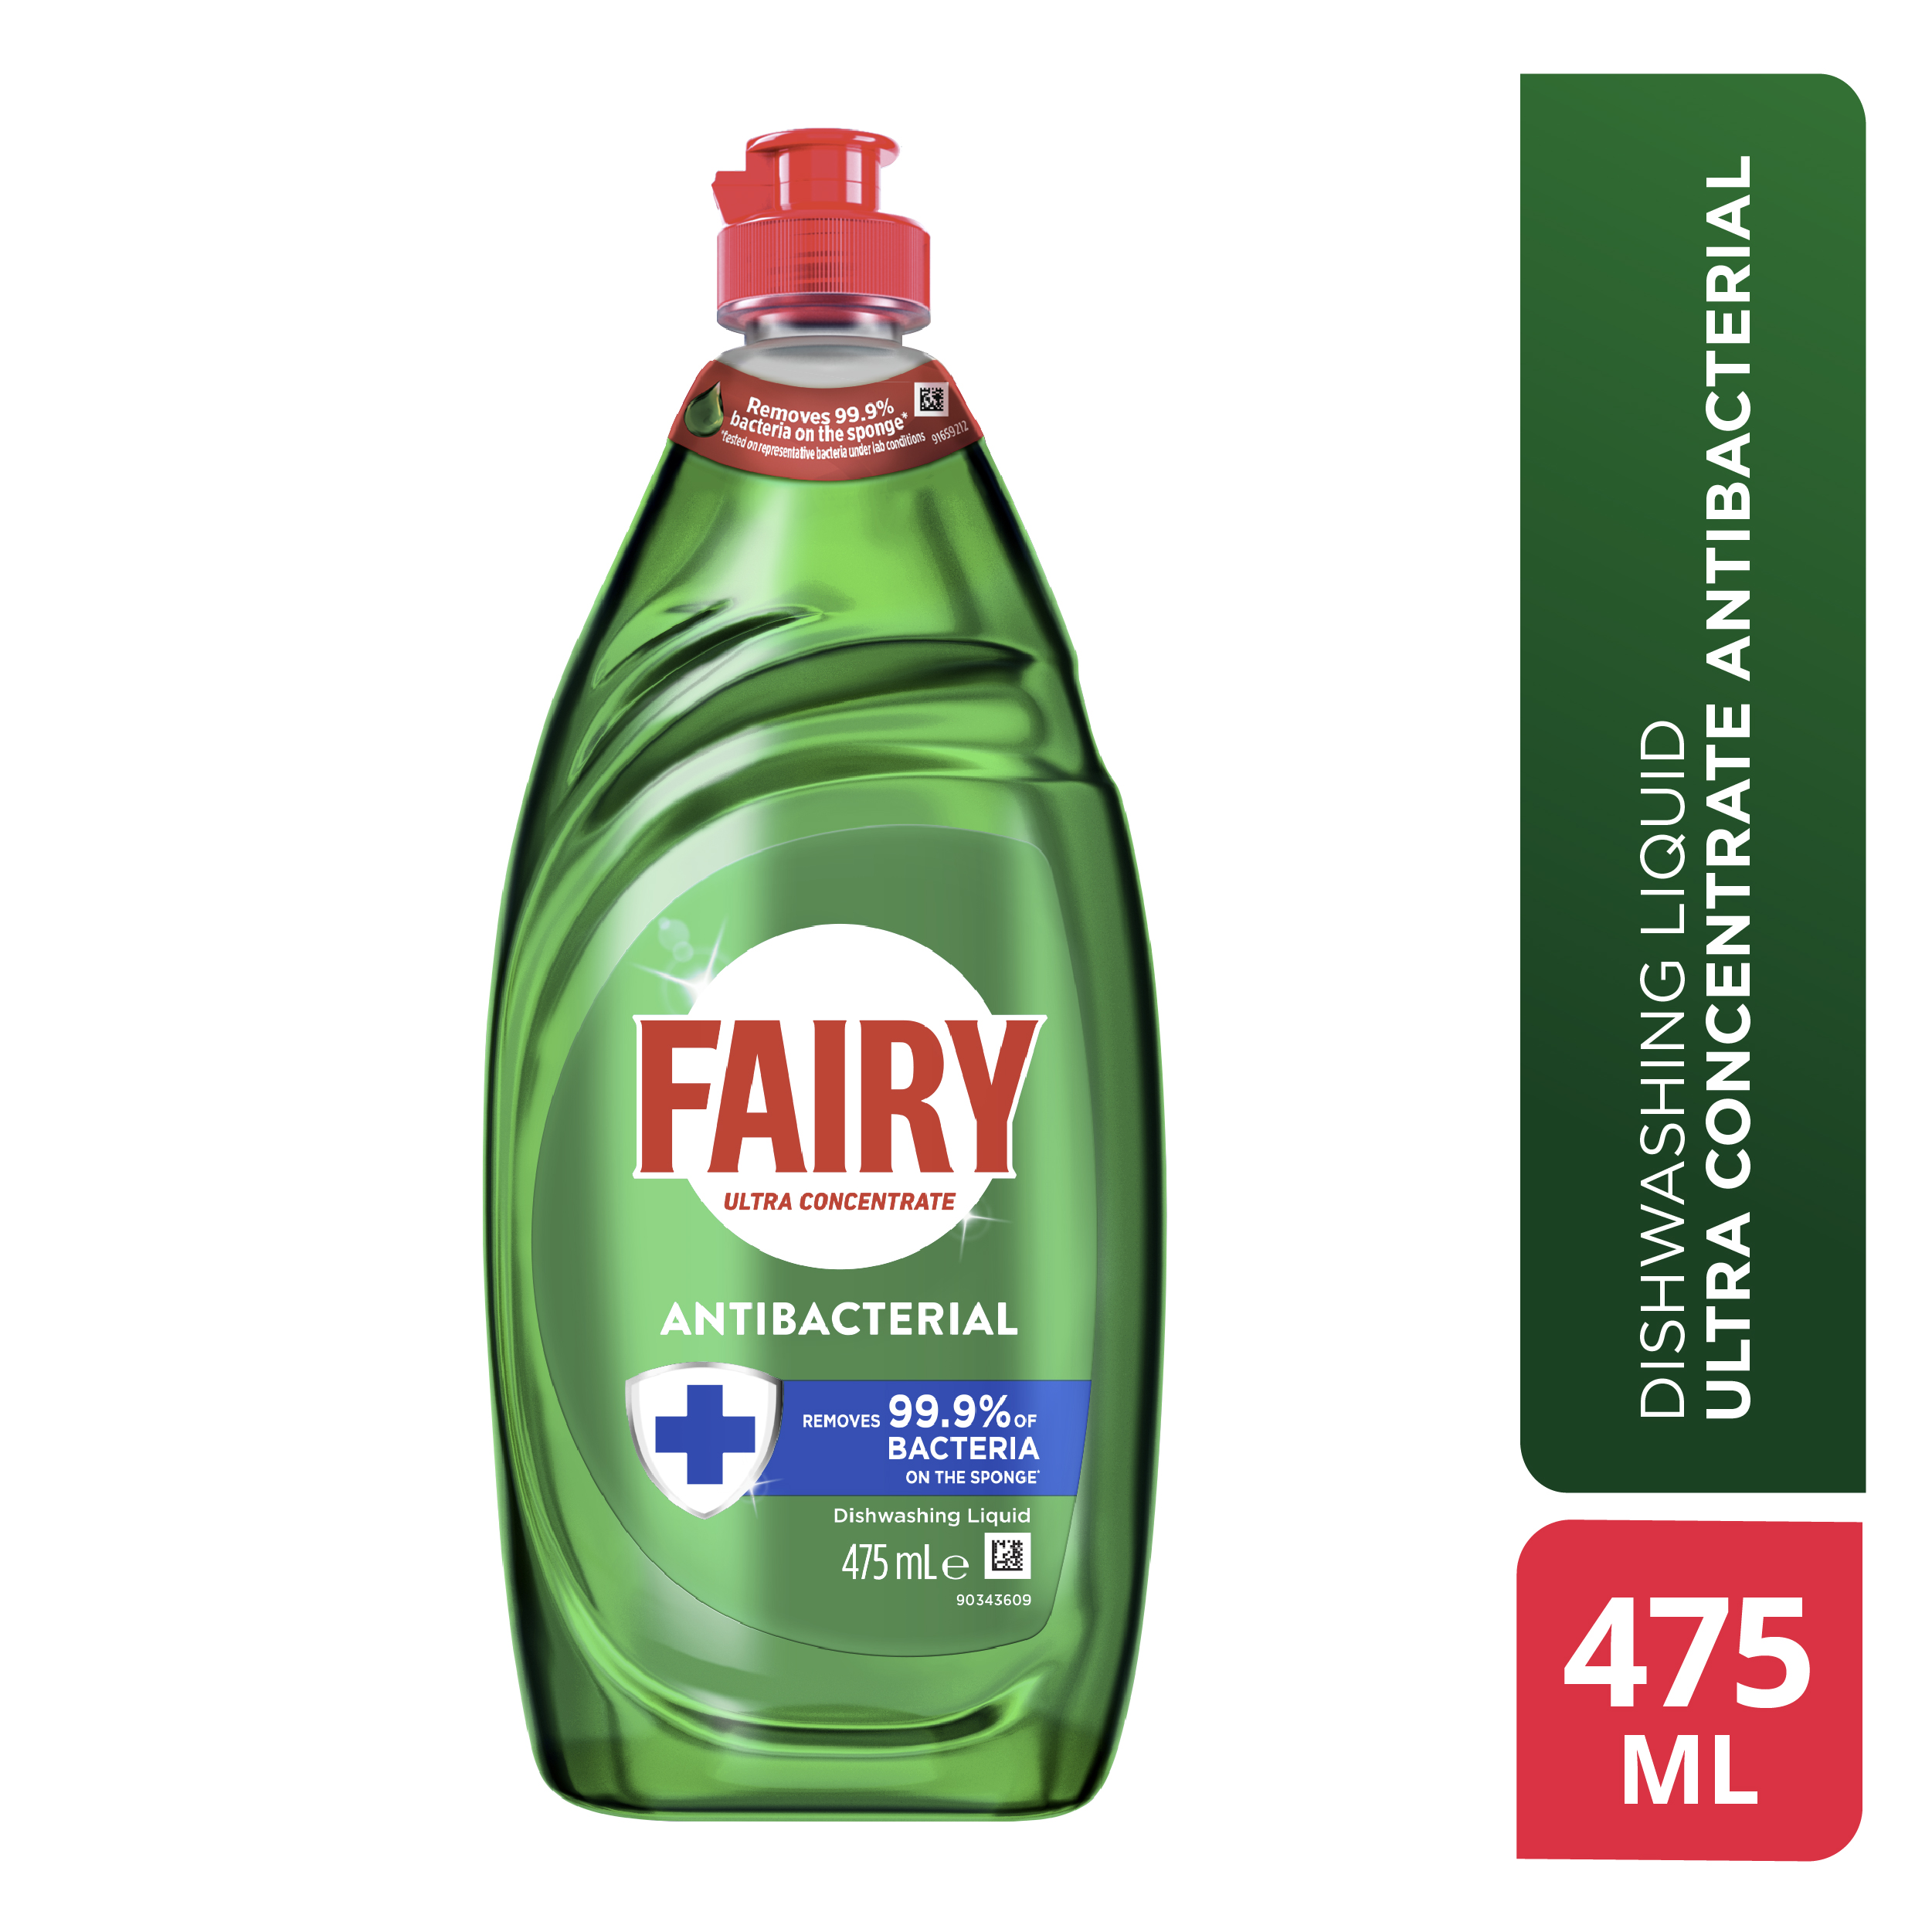 One drop of Fairy Ultra Concentrate Antibacterial is packed with powerful cleaning power